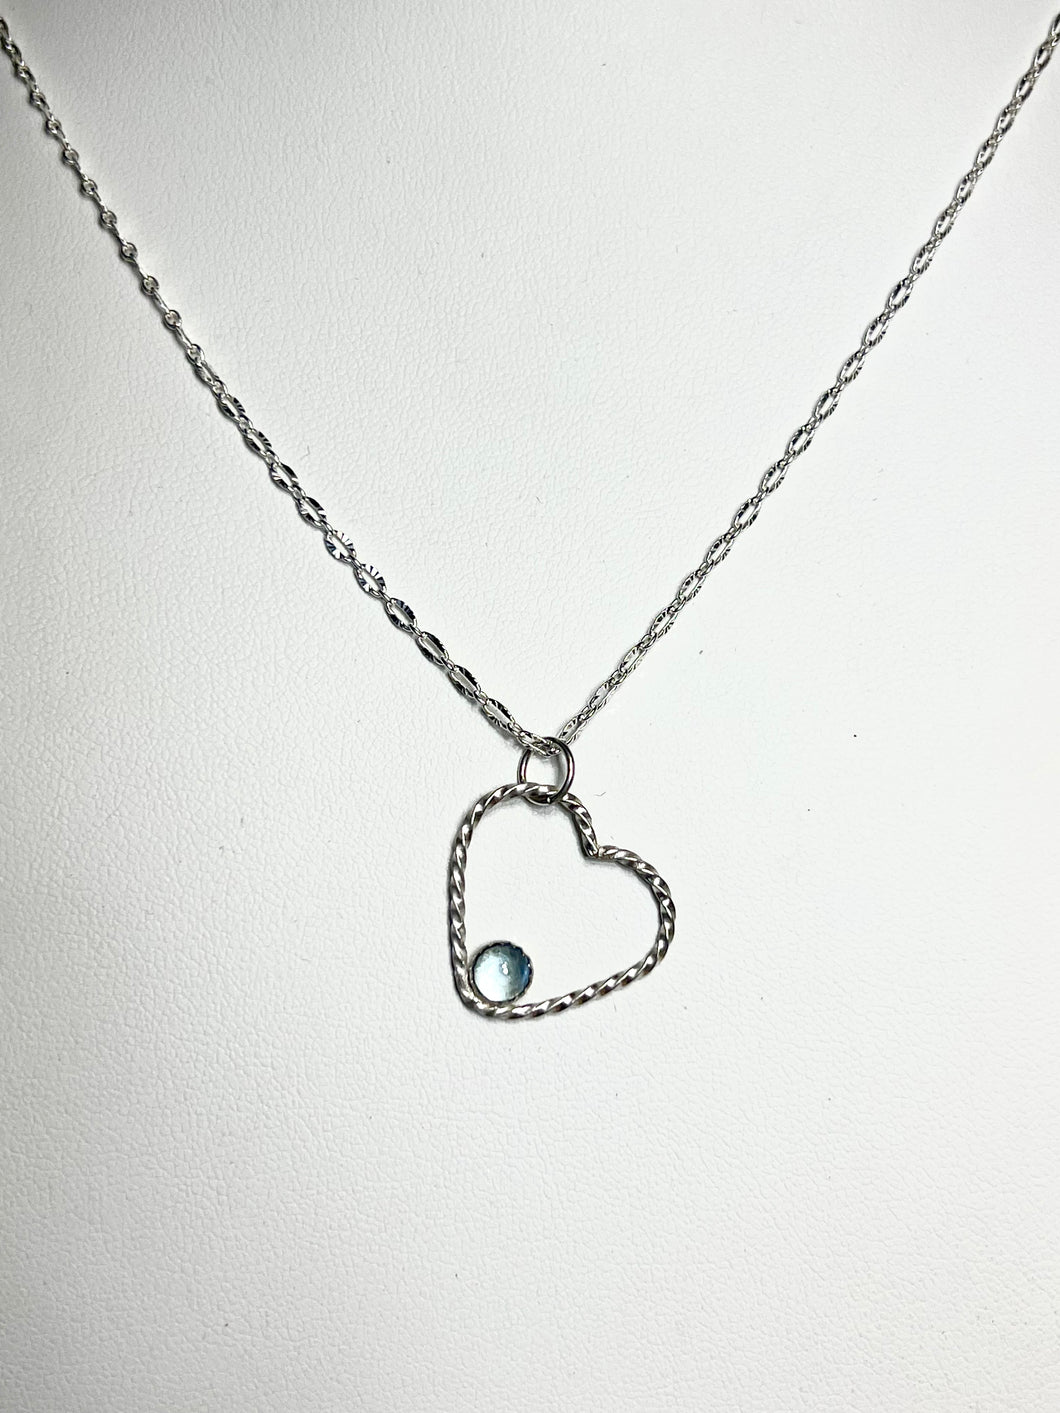 Blue topaz and sterling silver open heart necklace